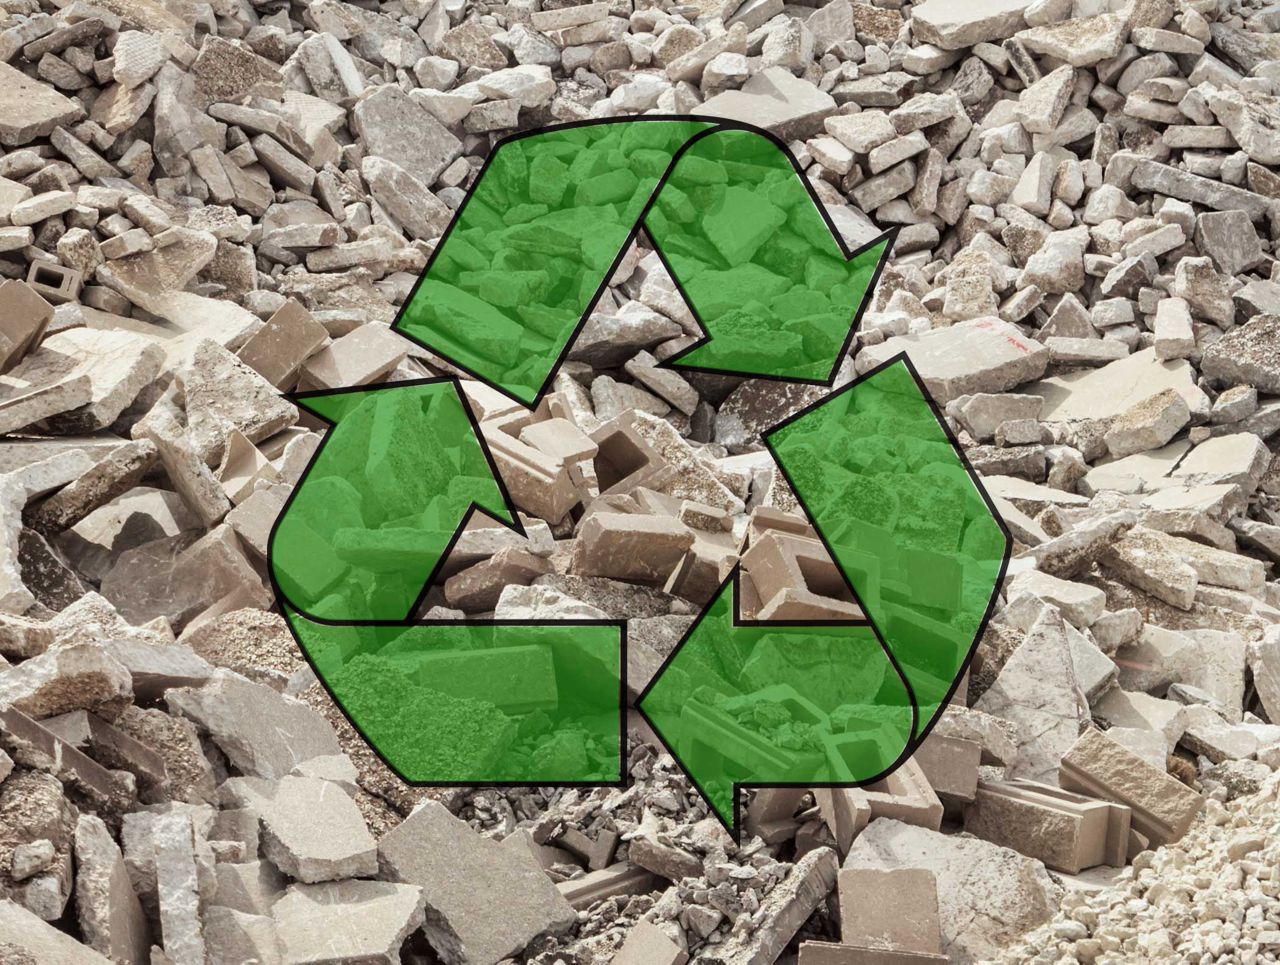 Illustration of green recycle symbol with broken concrete pieces